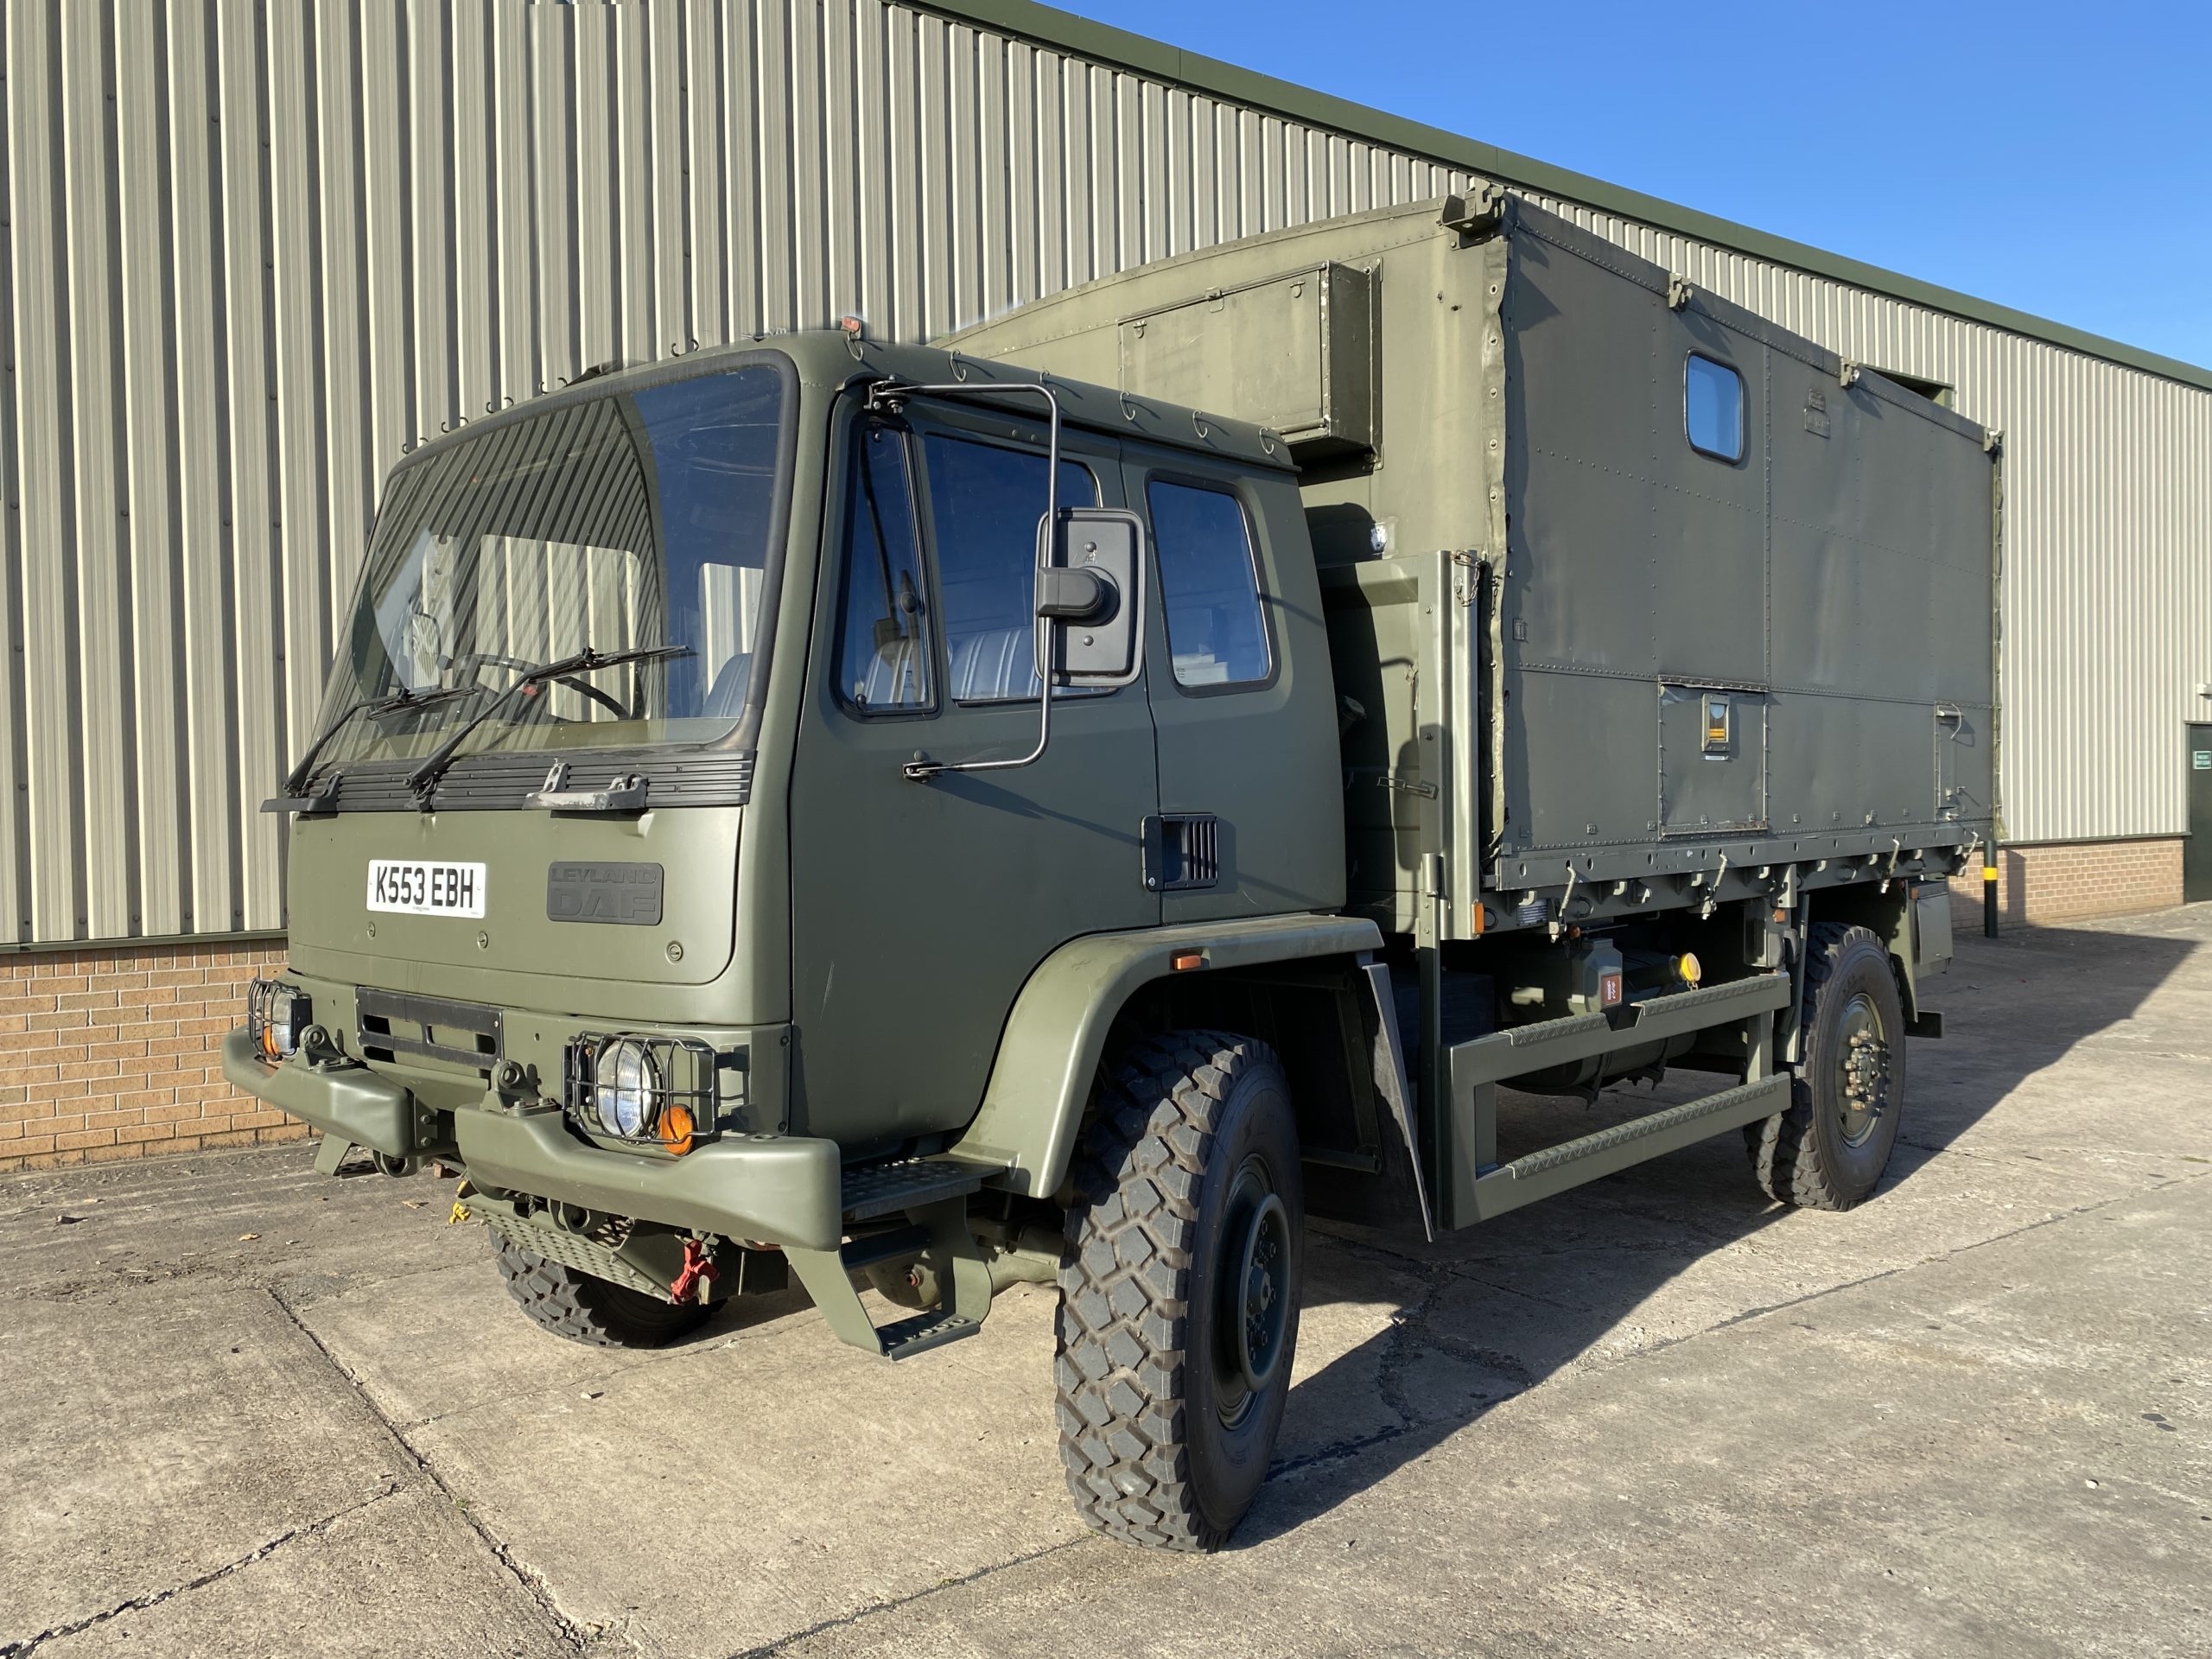 Leyland Daf 4x4 Box Truck Road Registered - ex military vehicles for sale, mod surplus